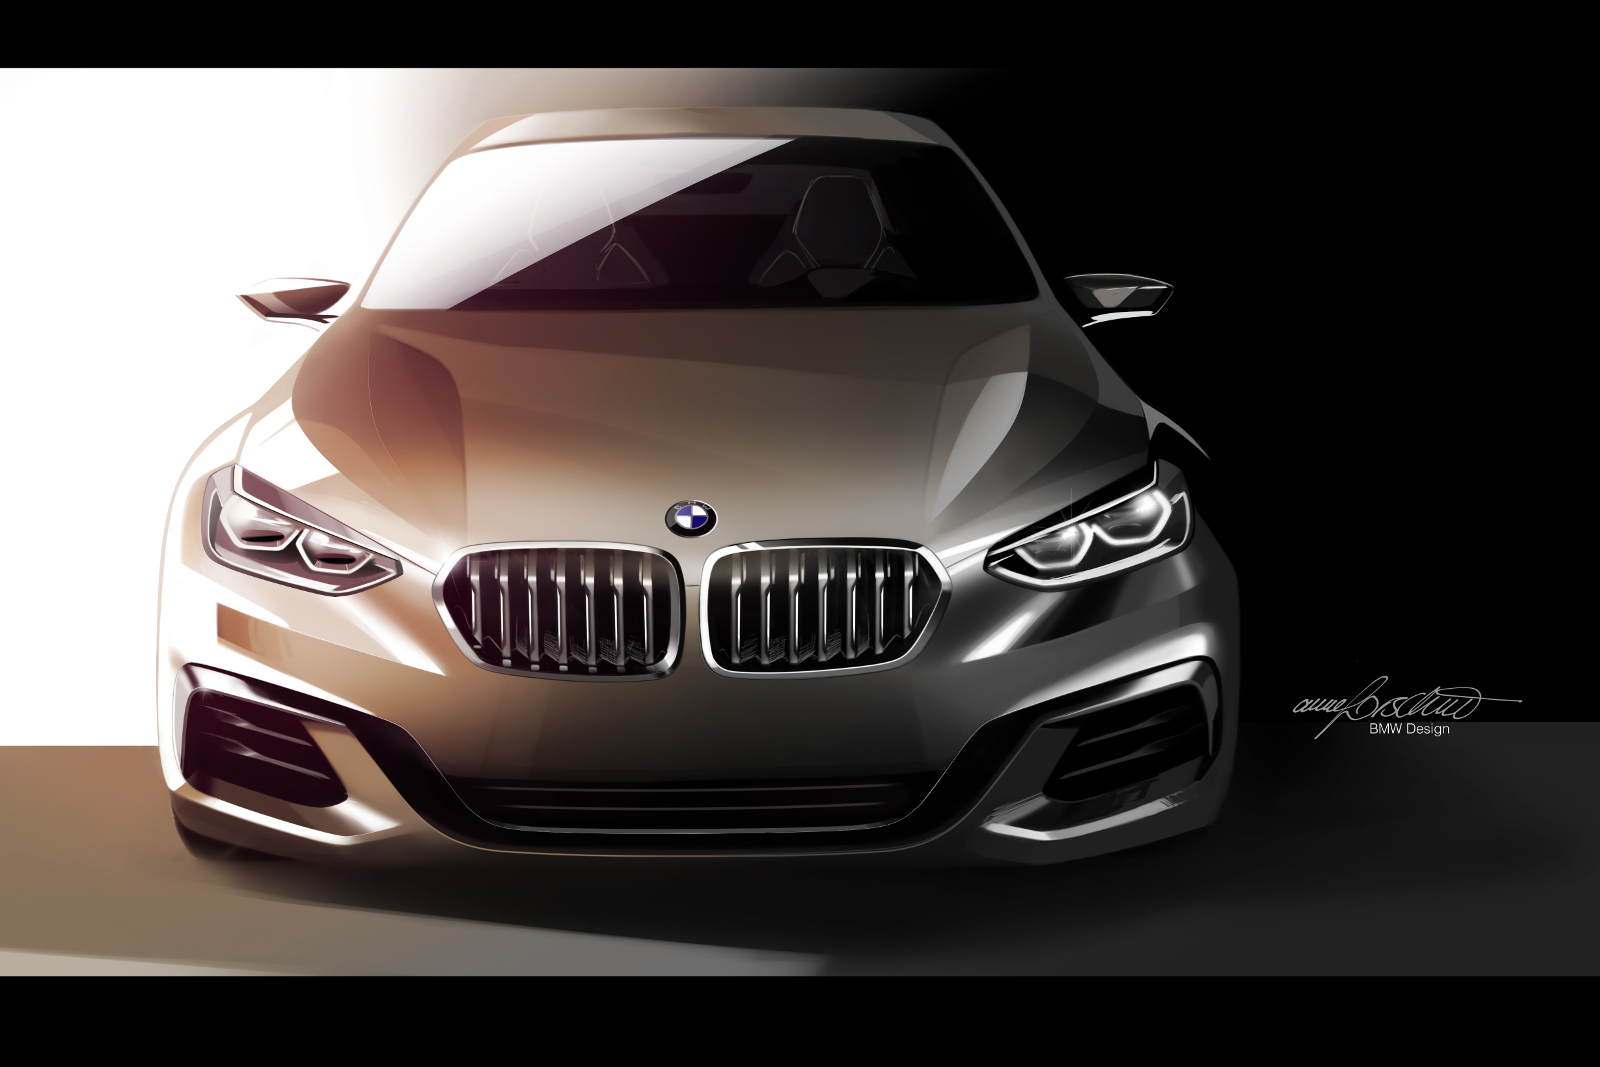 BMW Compact Sedan Concept Launched, Might Hint at Future 1-Series or 2-Series Sedan